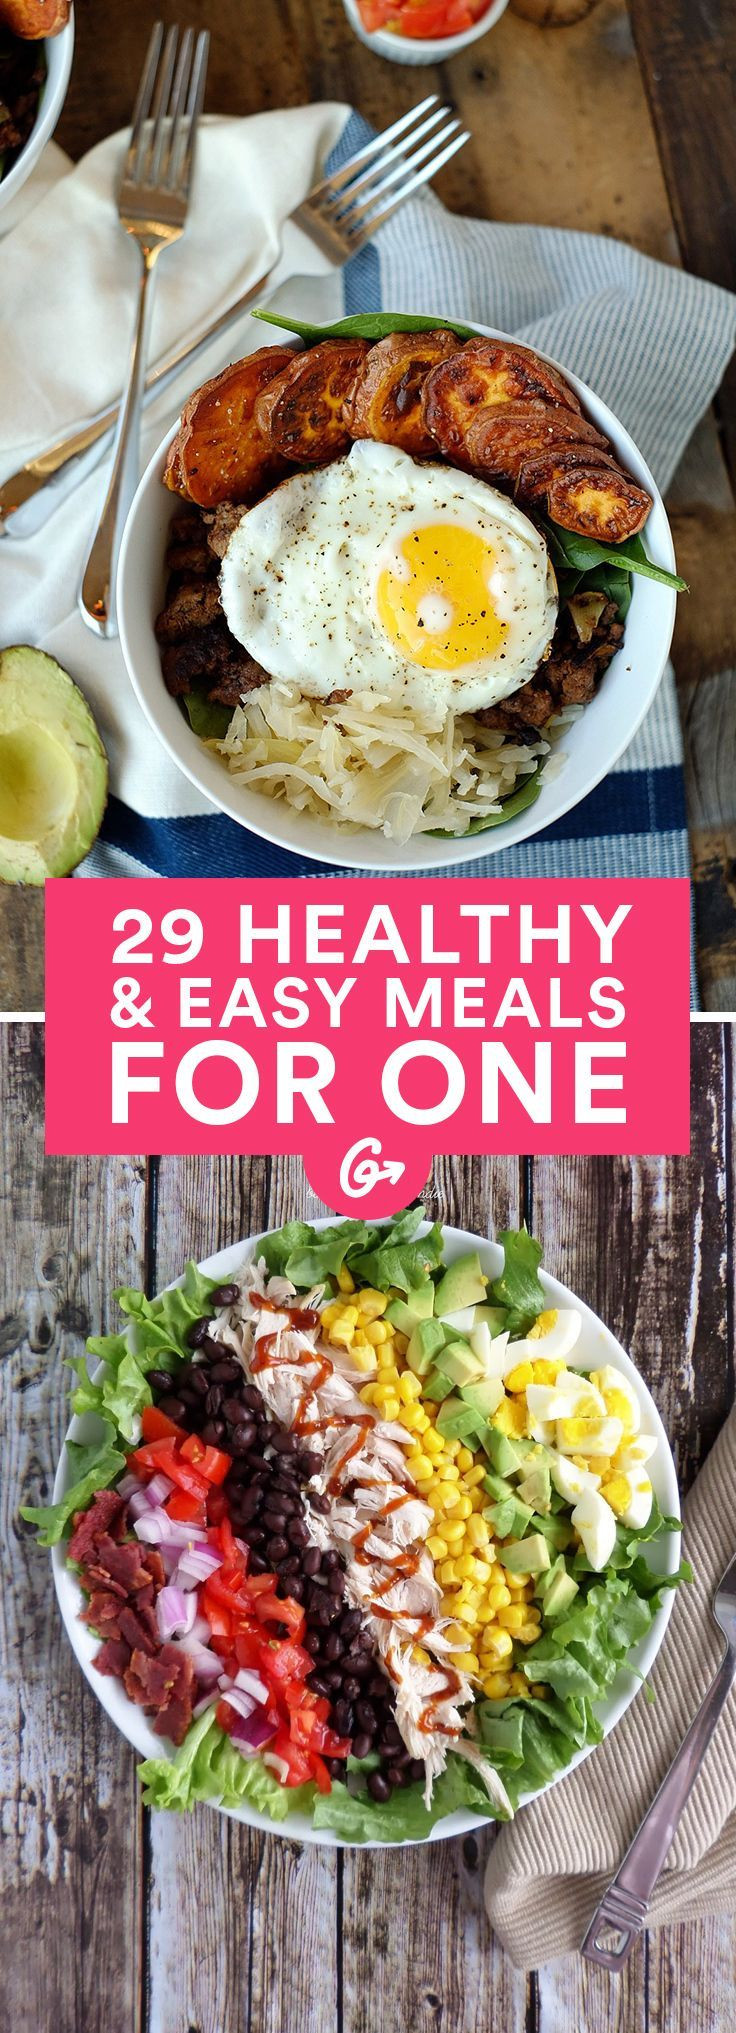 Healthy Easy Dinners
 17 Best images about Balance Recipes on Pinterest